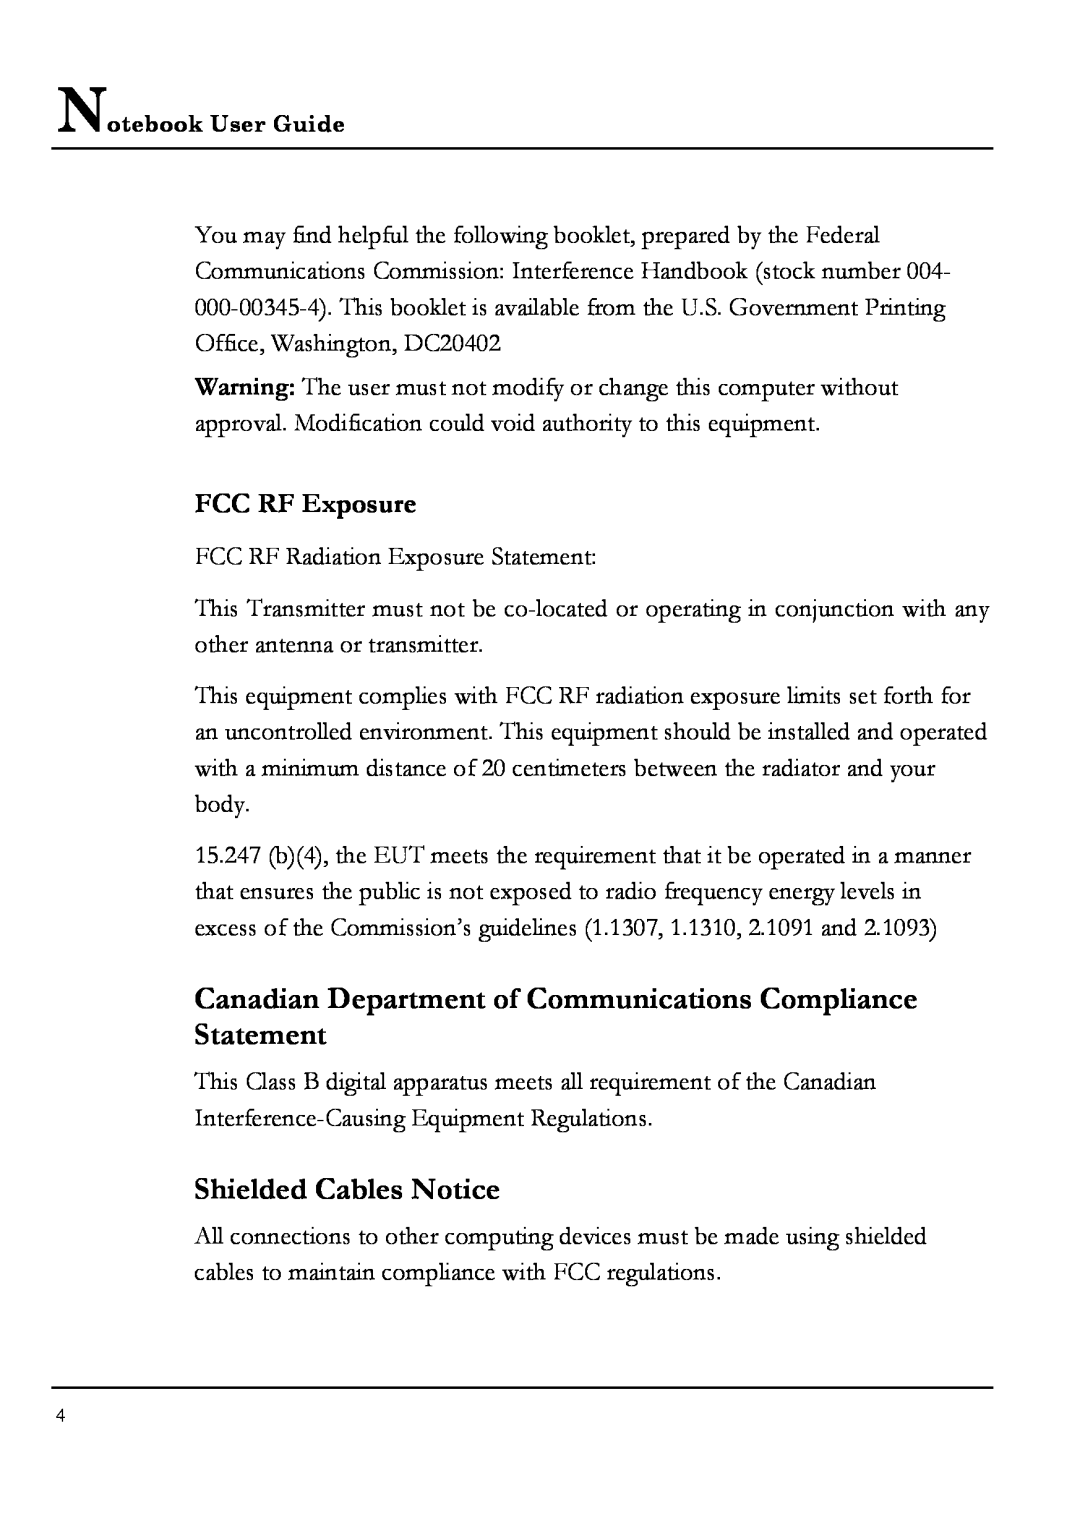 Everex NM4100W manual Canadian Department of Communications Compliance Statement, Shielded Cables Notice, FCC RF Exposure 